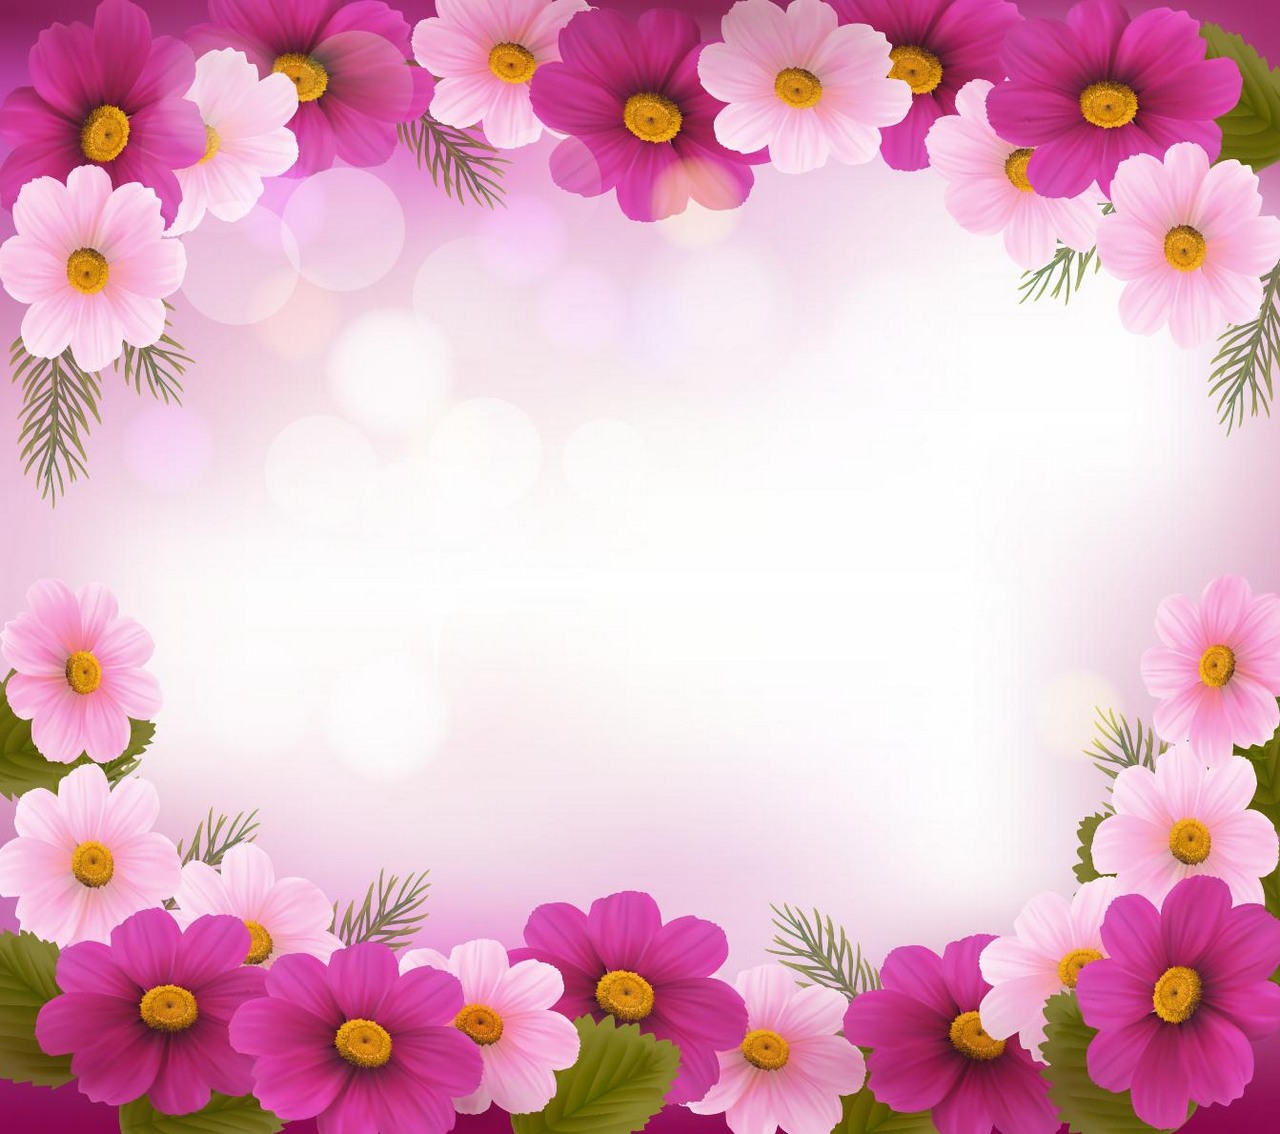 Flower Background Pictures Attachment [1123] - HD Wallpaper ...